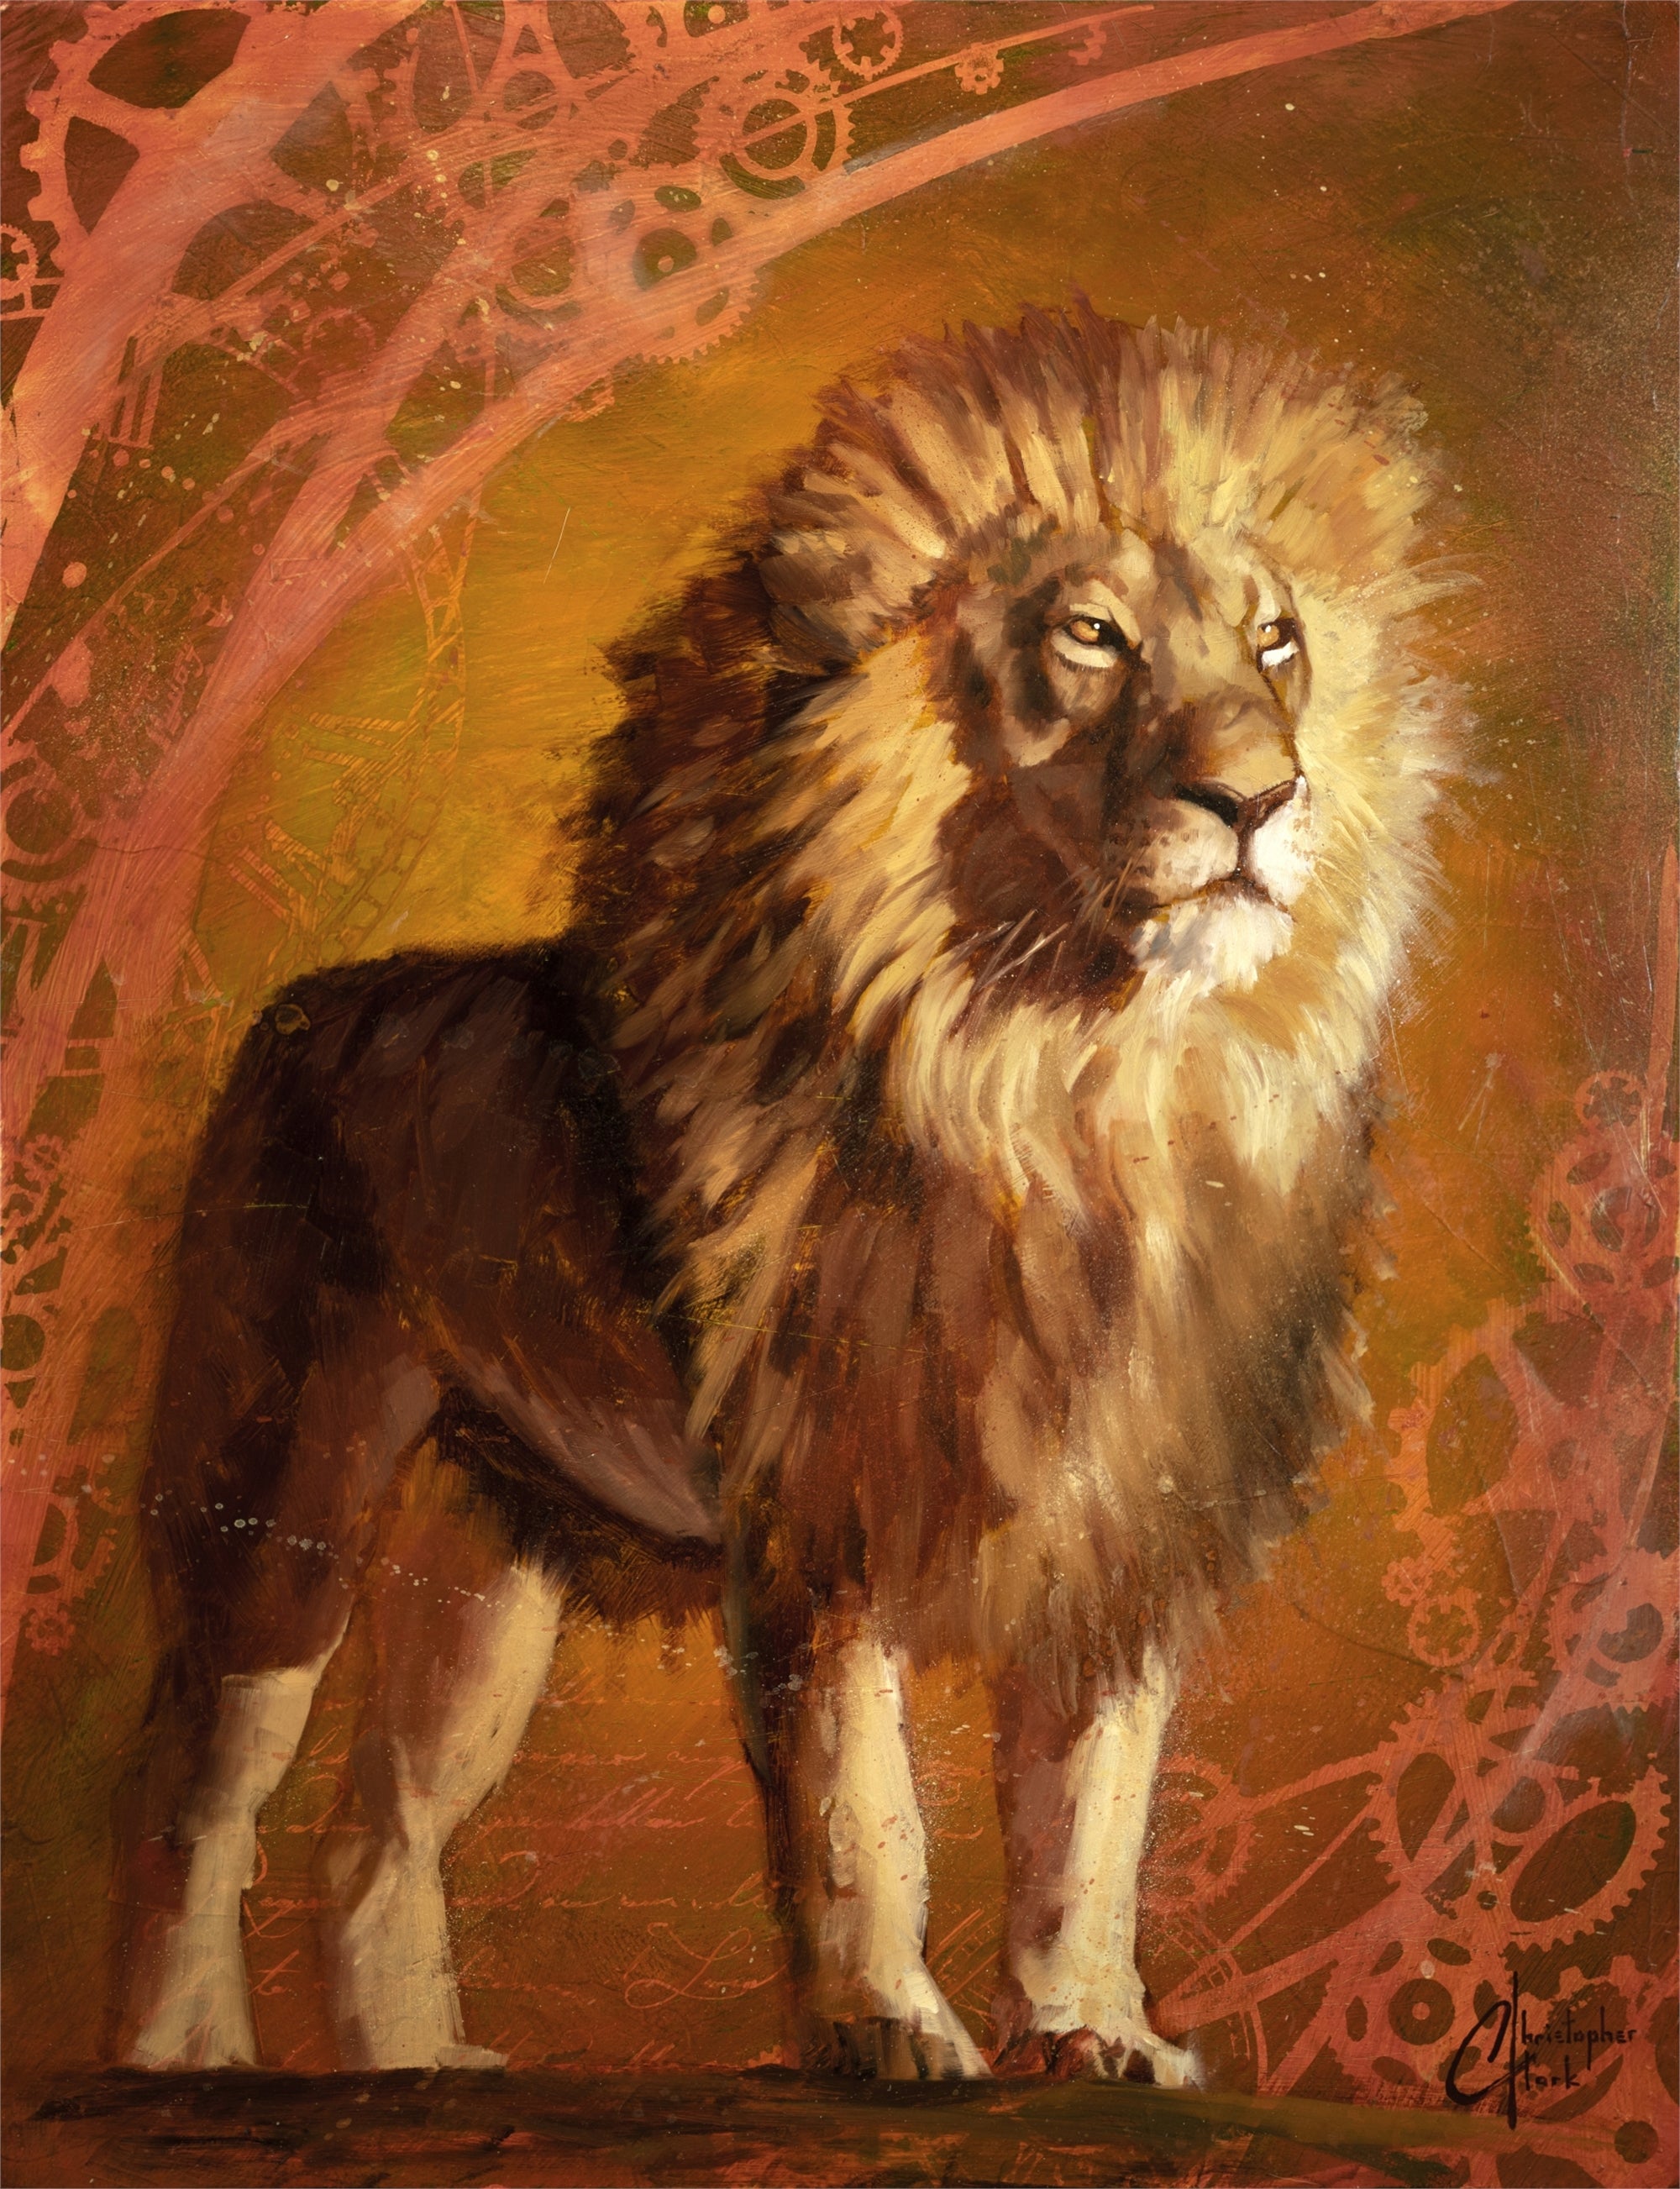 Original "Lion King II" 21.5"x16.5" Oil on Wood by Christopher Clark